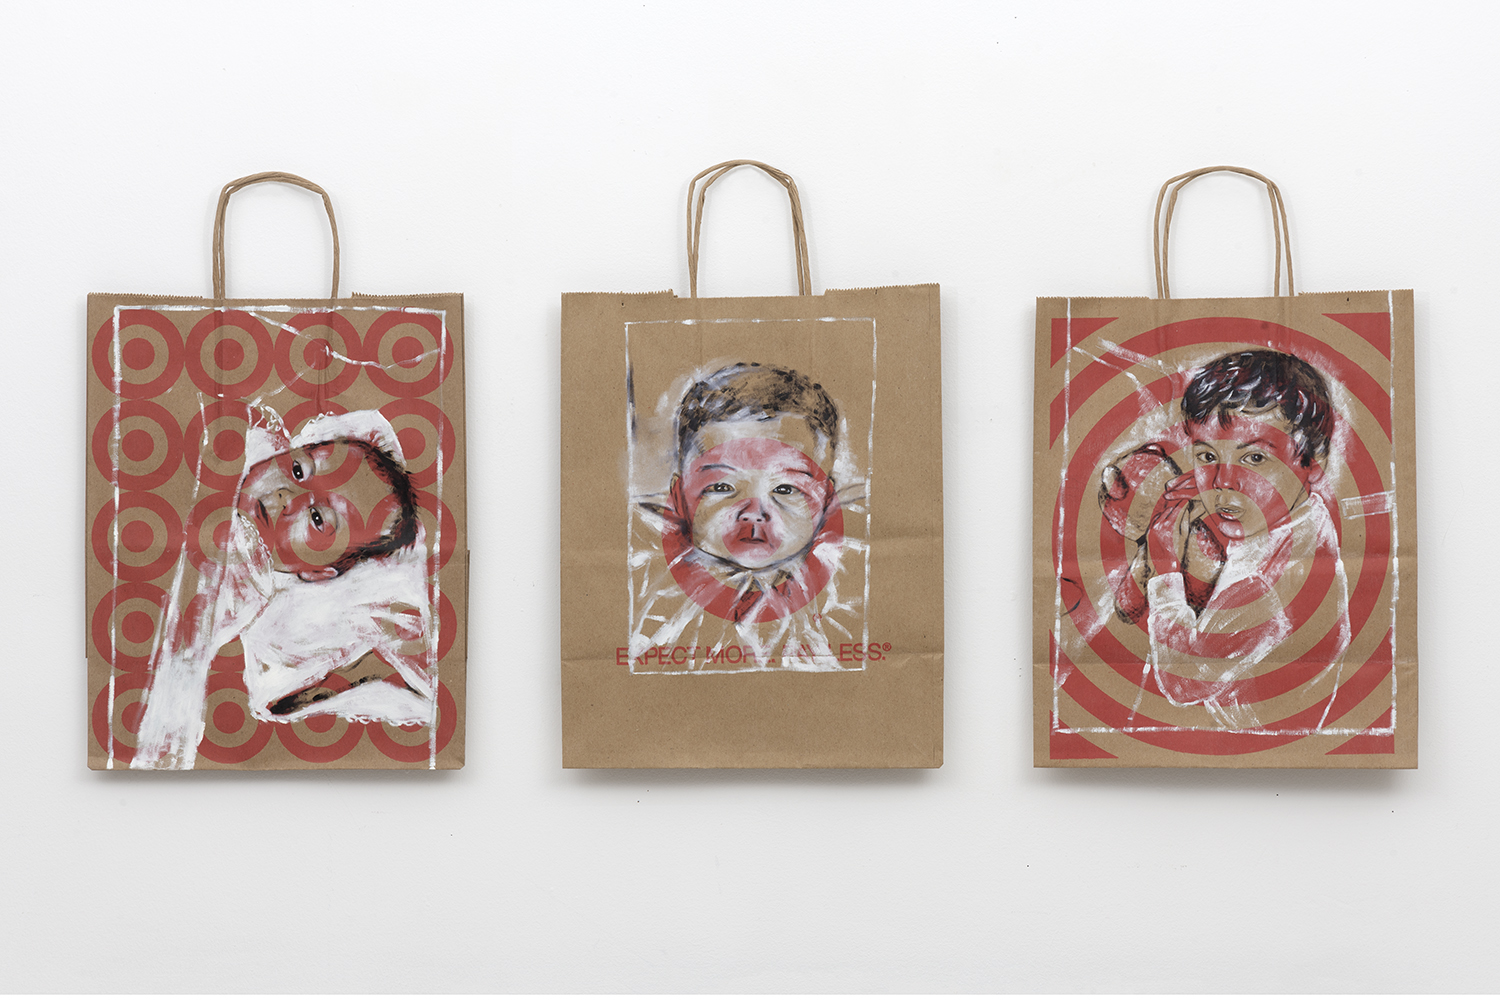 Babies painted on 3 Target grocery bags